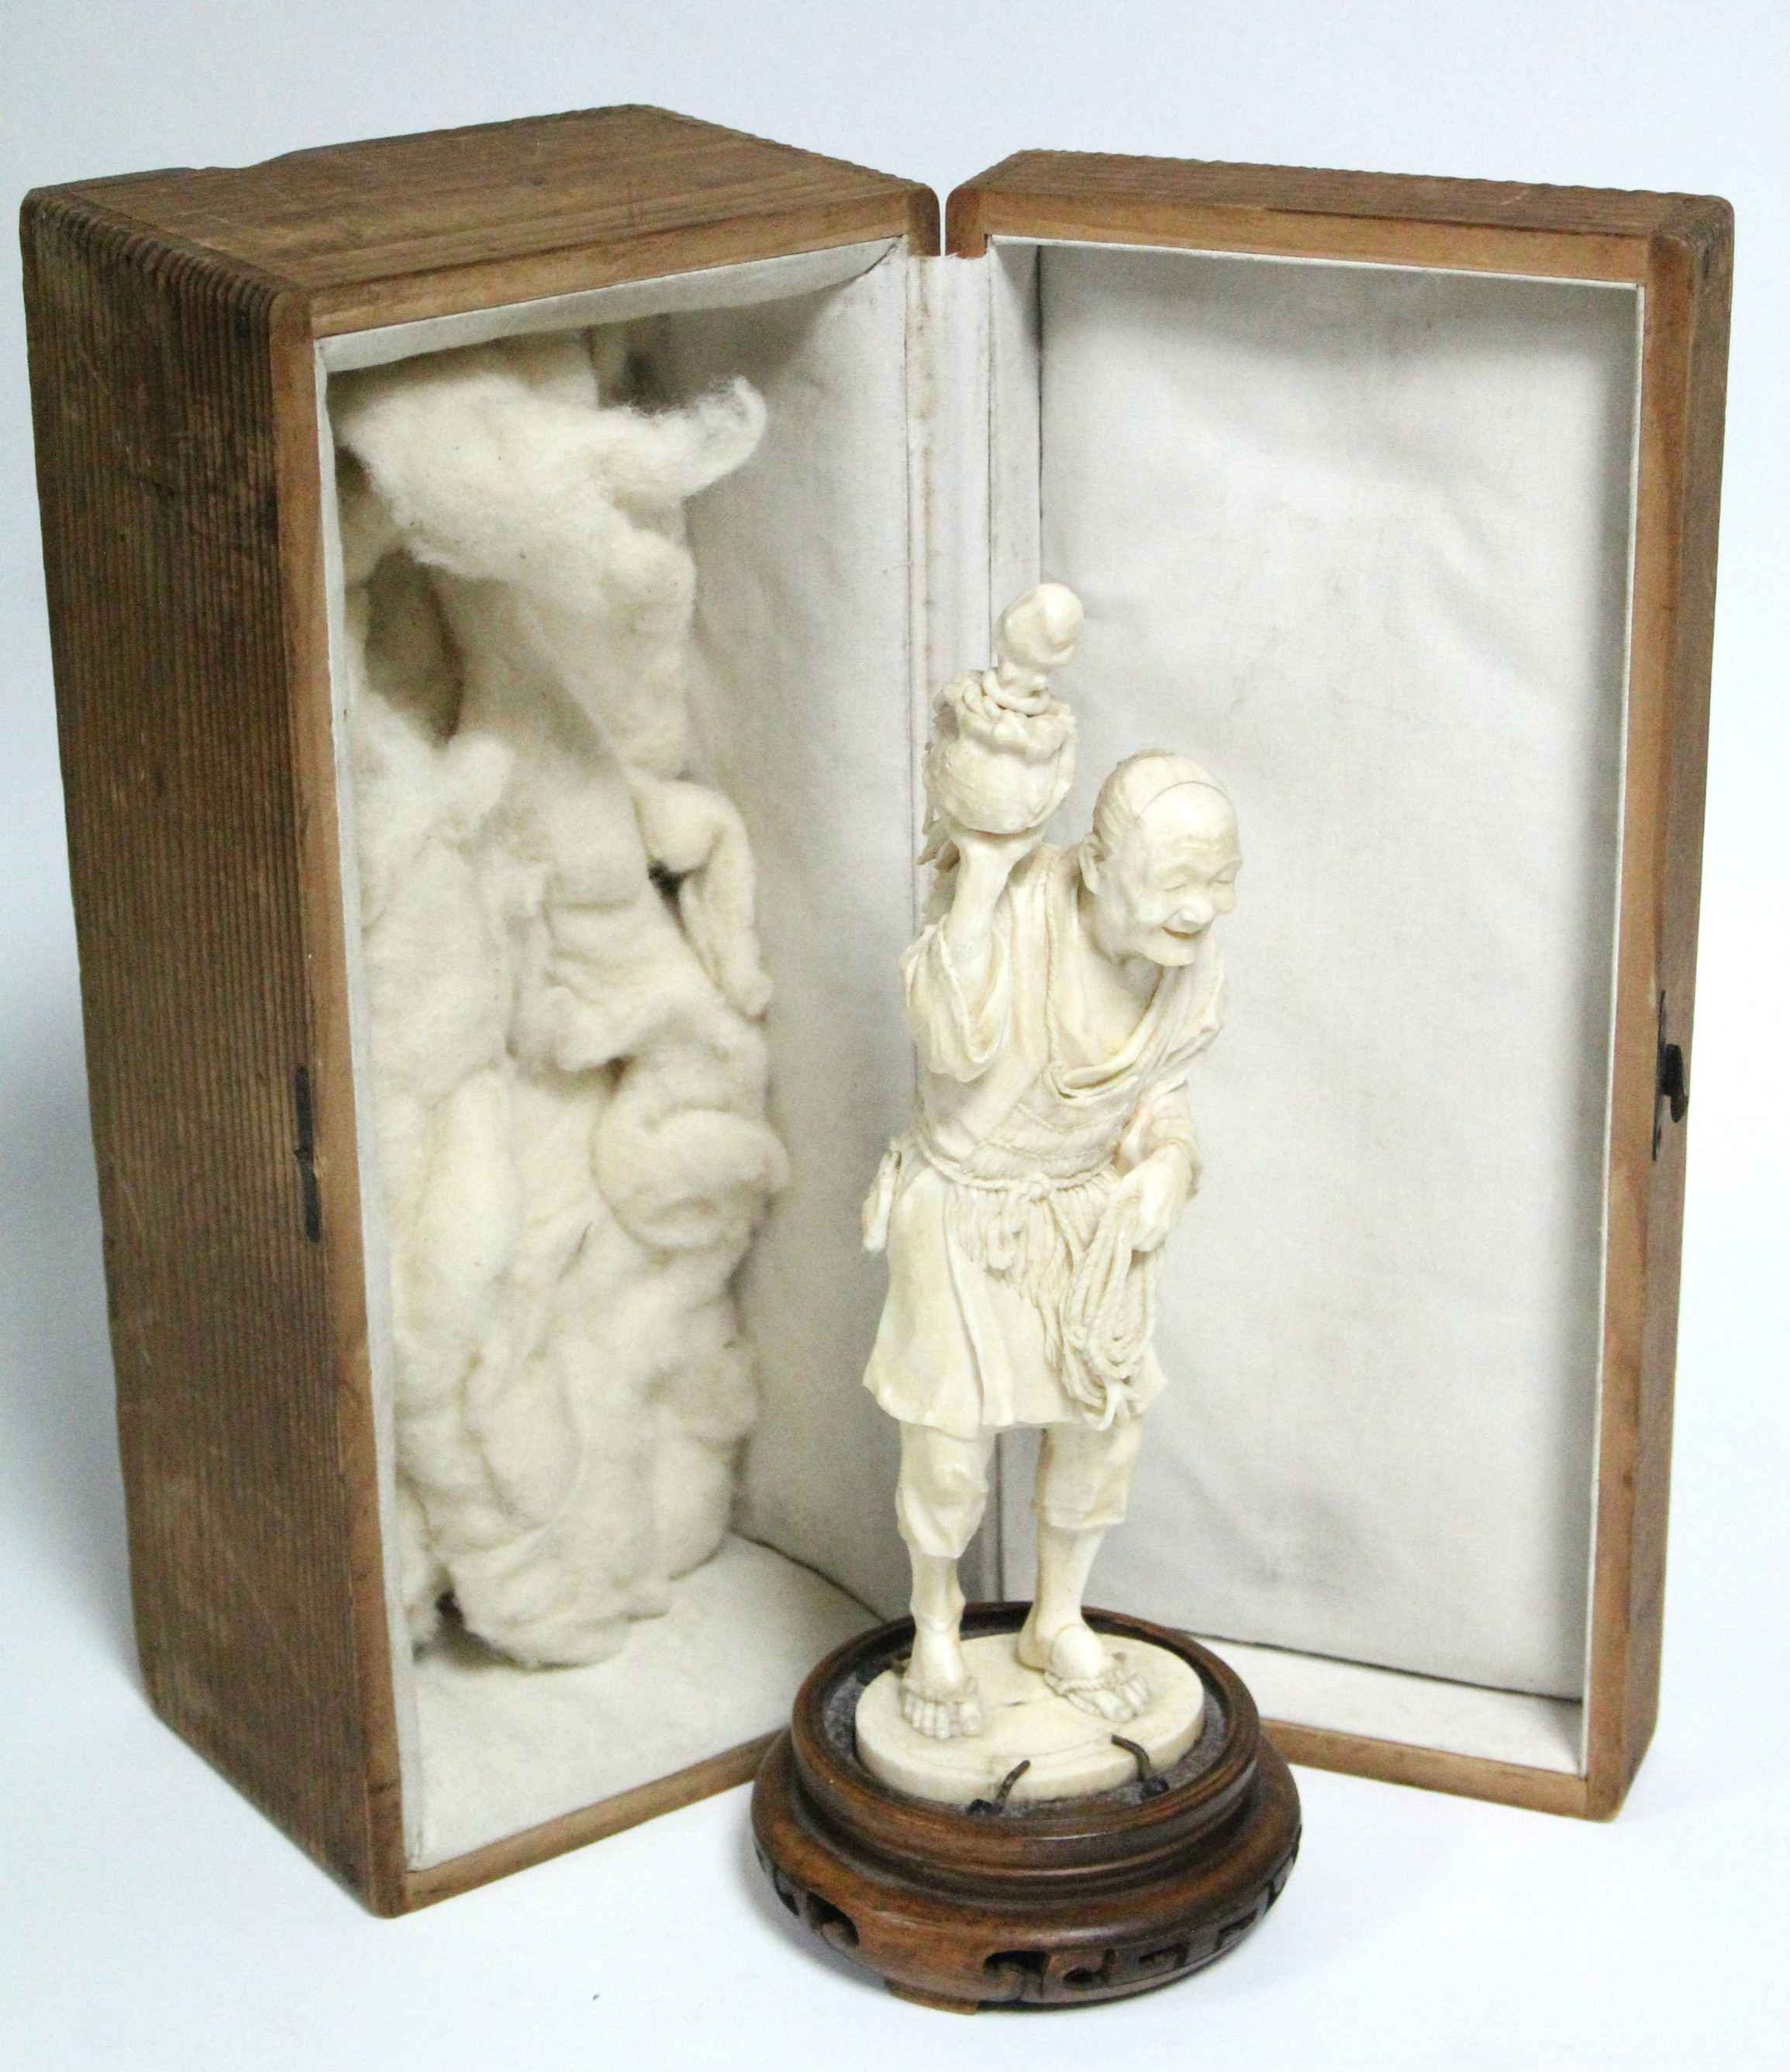 A LATE 19th century JAPANESE IVORY OKIMONO of a standing fisherman holding aloft an octopus in a pot - Image 6 of 6